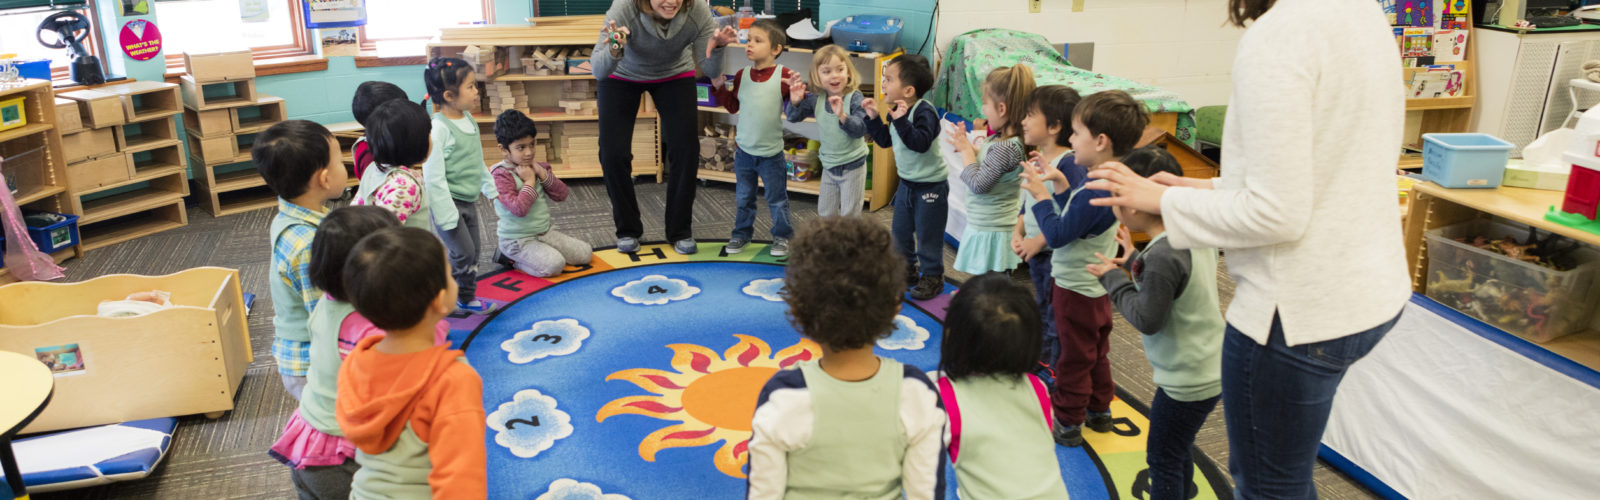 Students, parents and teachers see benefits with bilingual, multicultural early child care education